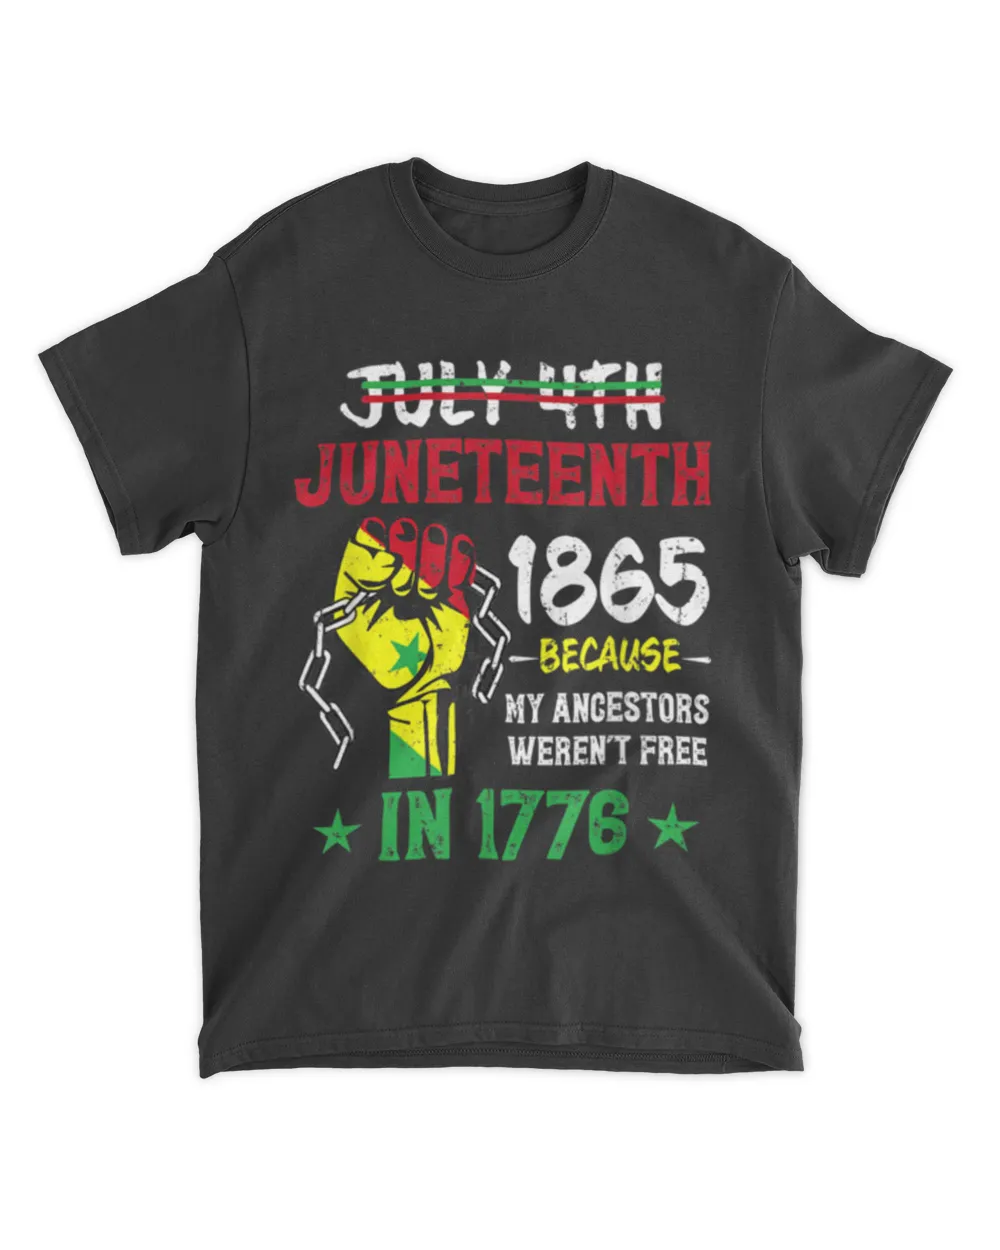 July 4th Juneteenth 1865 Lovers Freedom African Americans T-Shirts tee